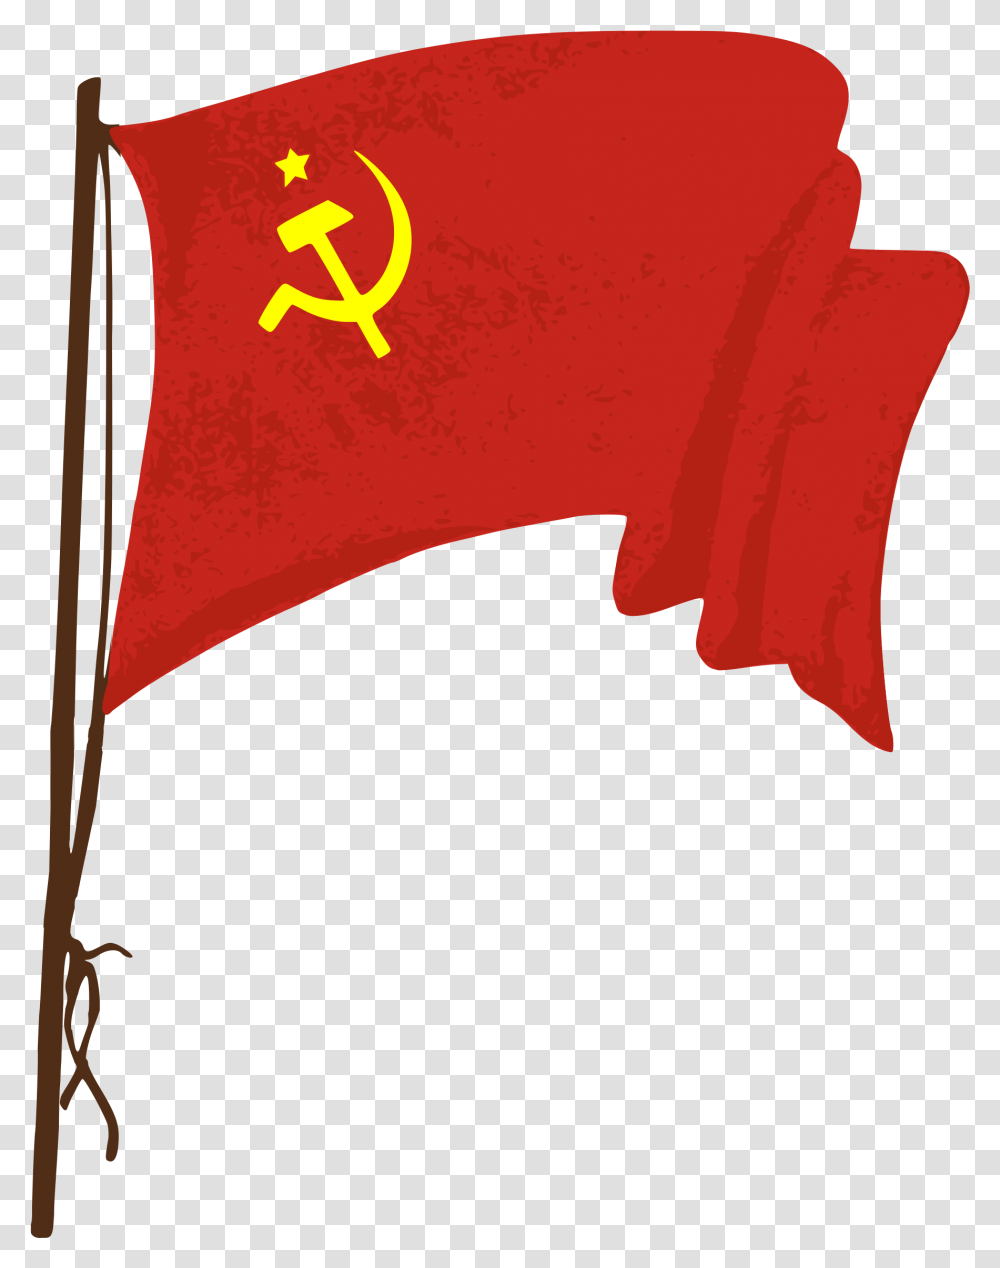 Download Hd Big Image Soviet Union Image Soviet Russian Flag, Pillow, Cushion, Hand, Text Transparent Png